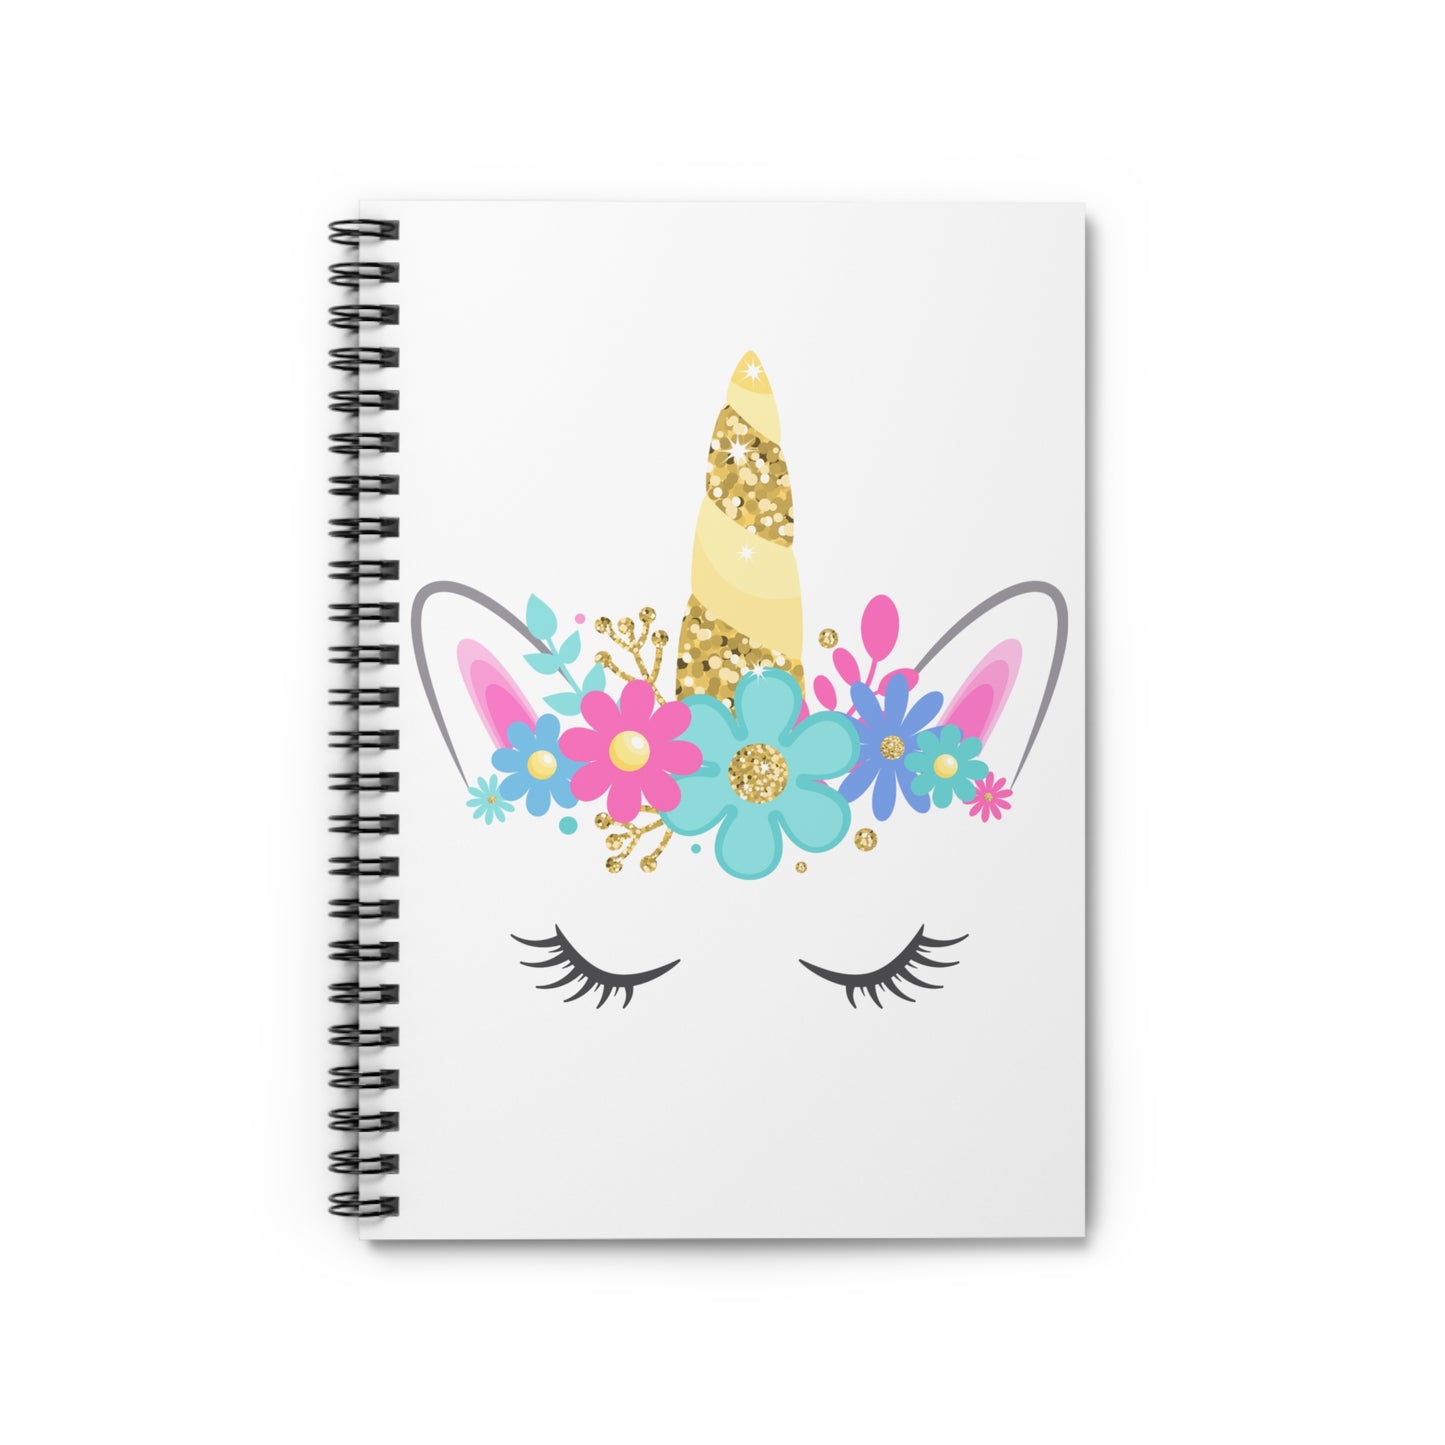 Mythical Unicorn Face: Spiral Notebook - Log Books - Journals - Diaries - and More Custom Printed by TheGlassyLass.com